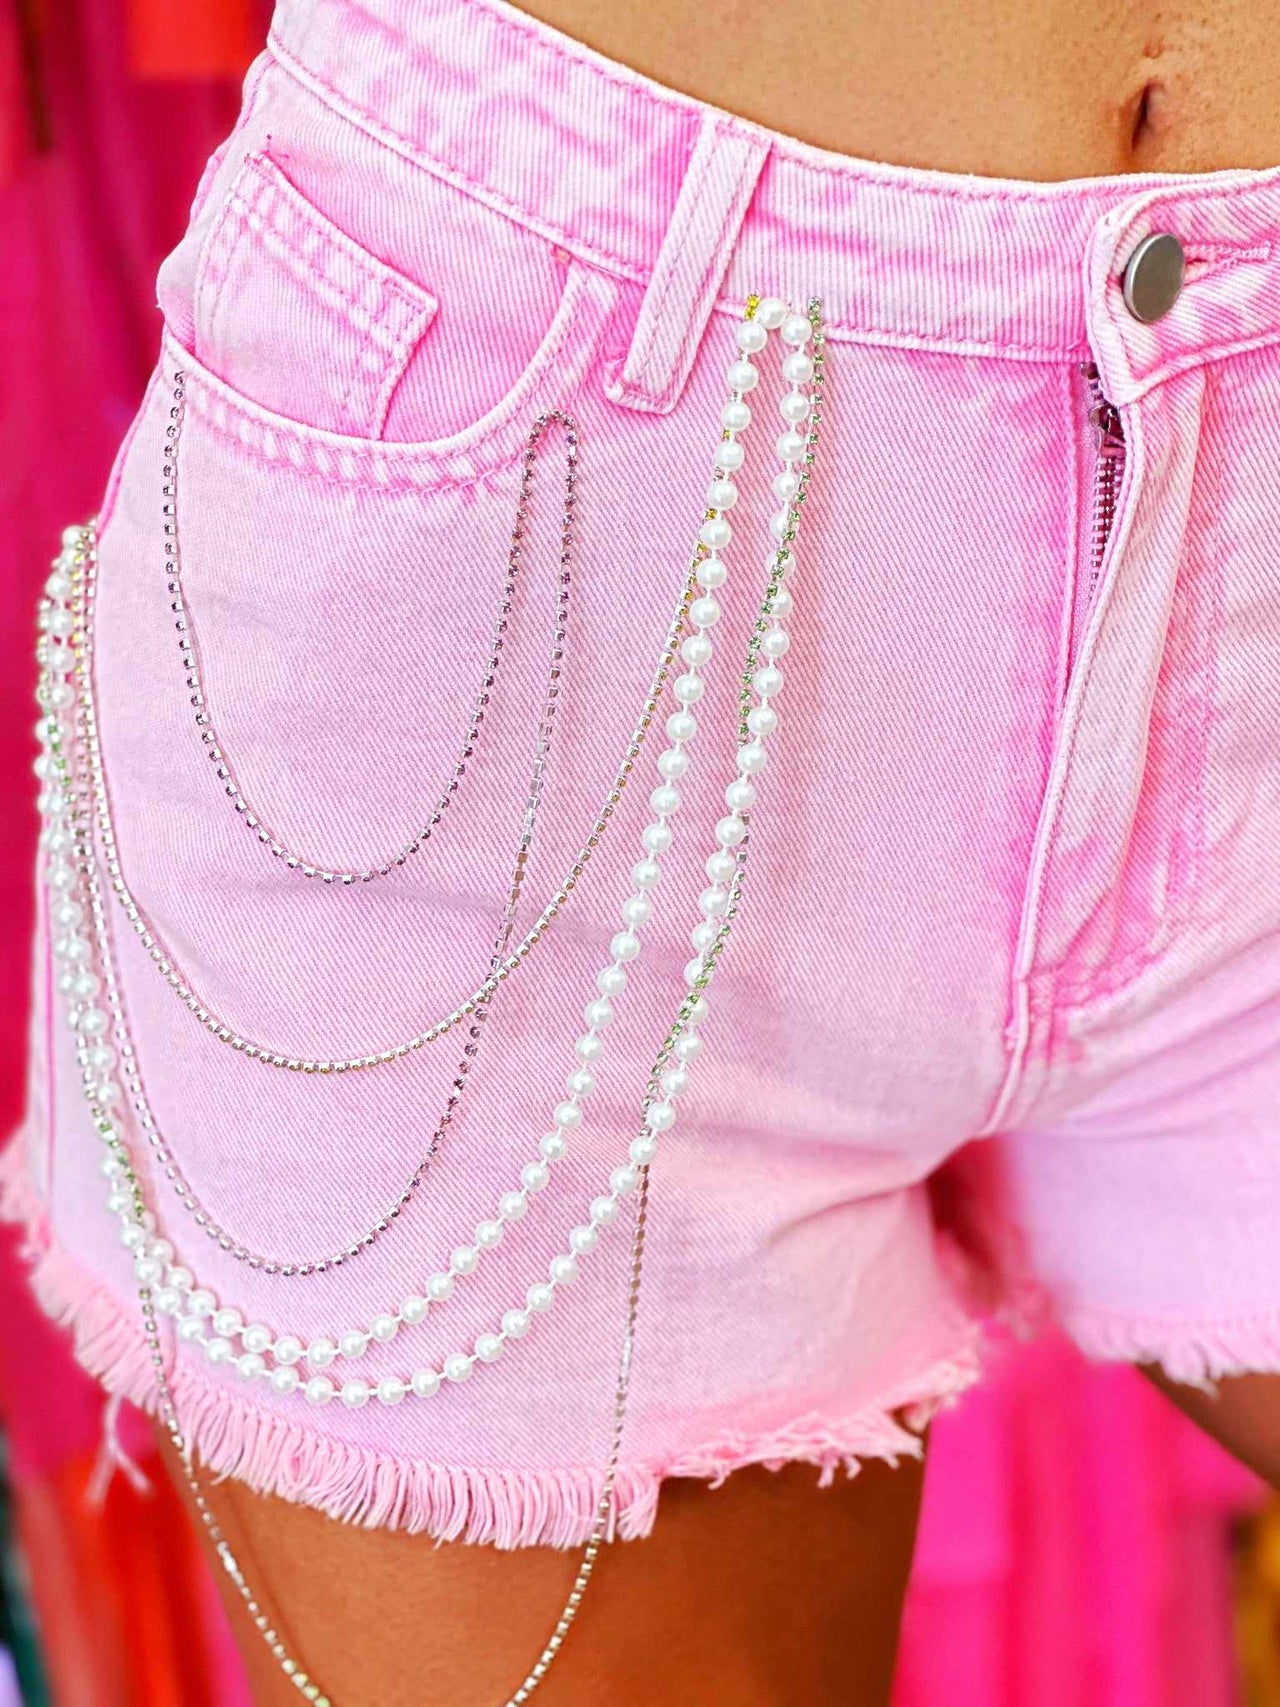 Center Stage Rhinestone and Pearl Shorts - Pink